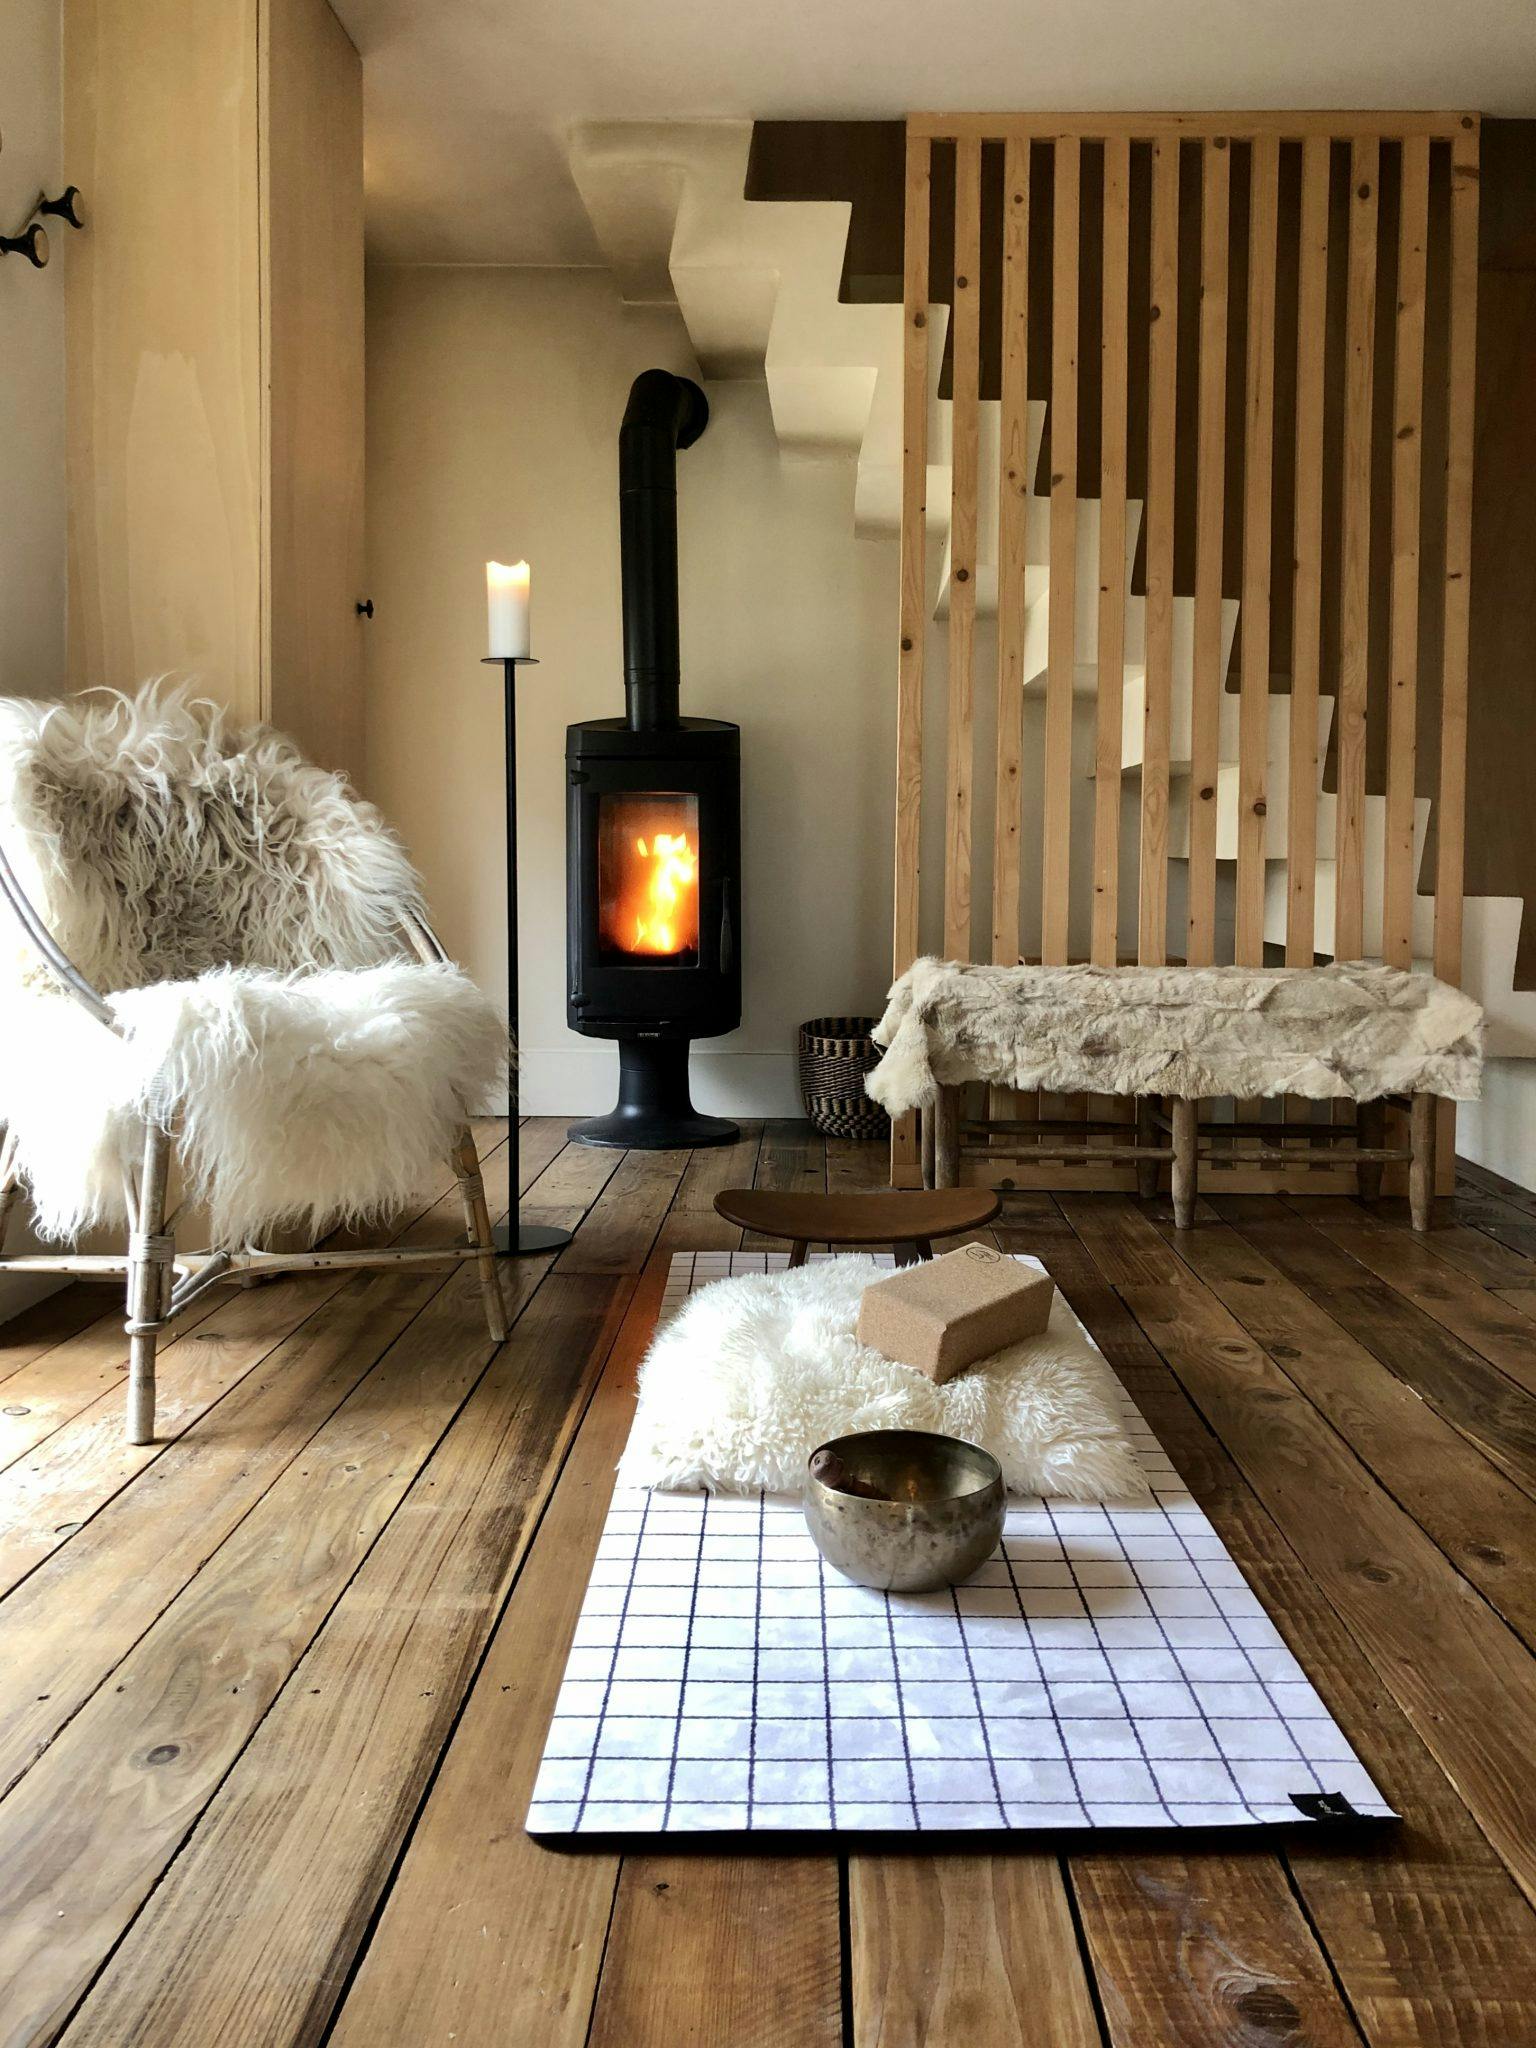 Wood-burning stove in the living-room